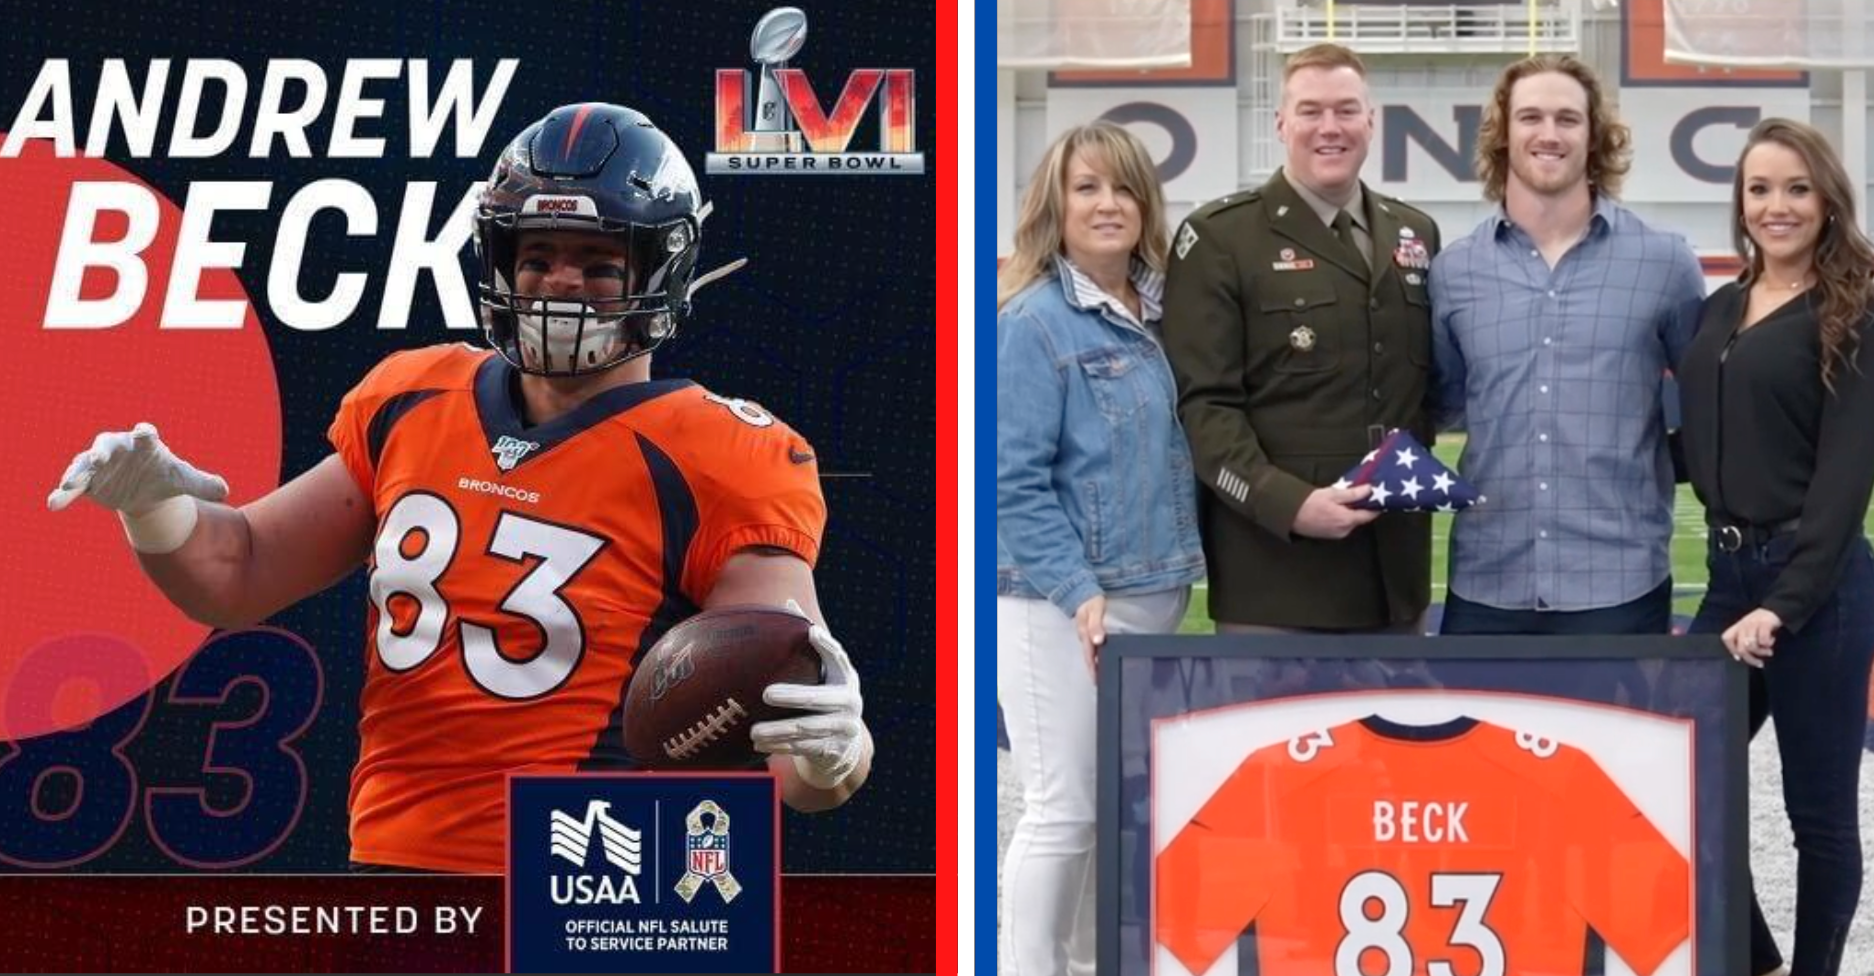 WATCH Why this NFL player, Salute to Service Award winner works tirelessly for military families We Are The Mighty